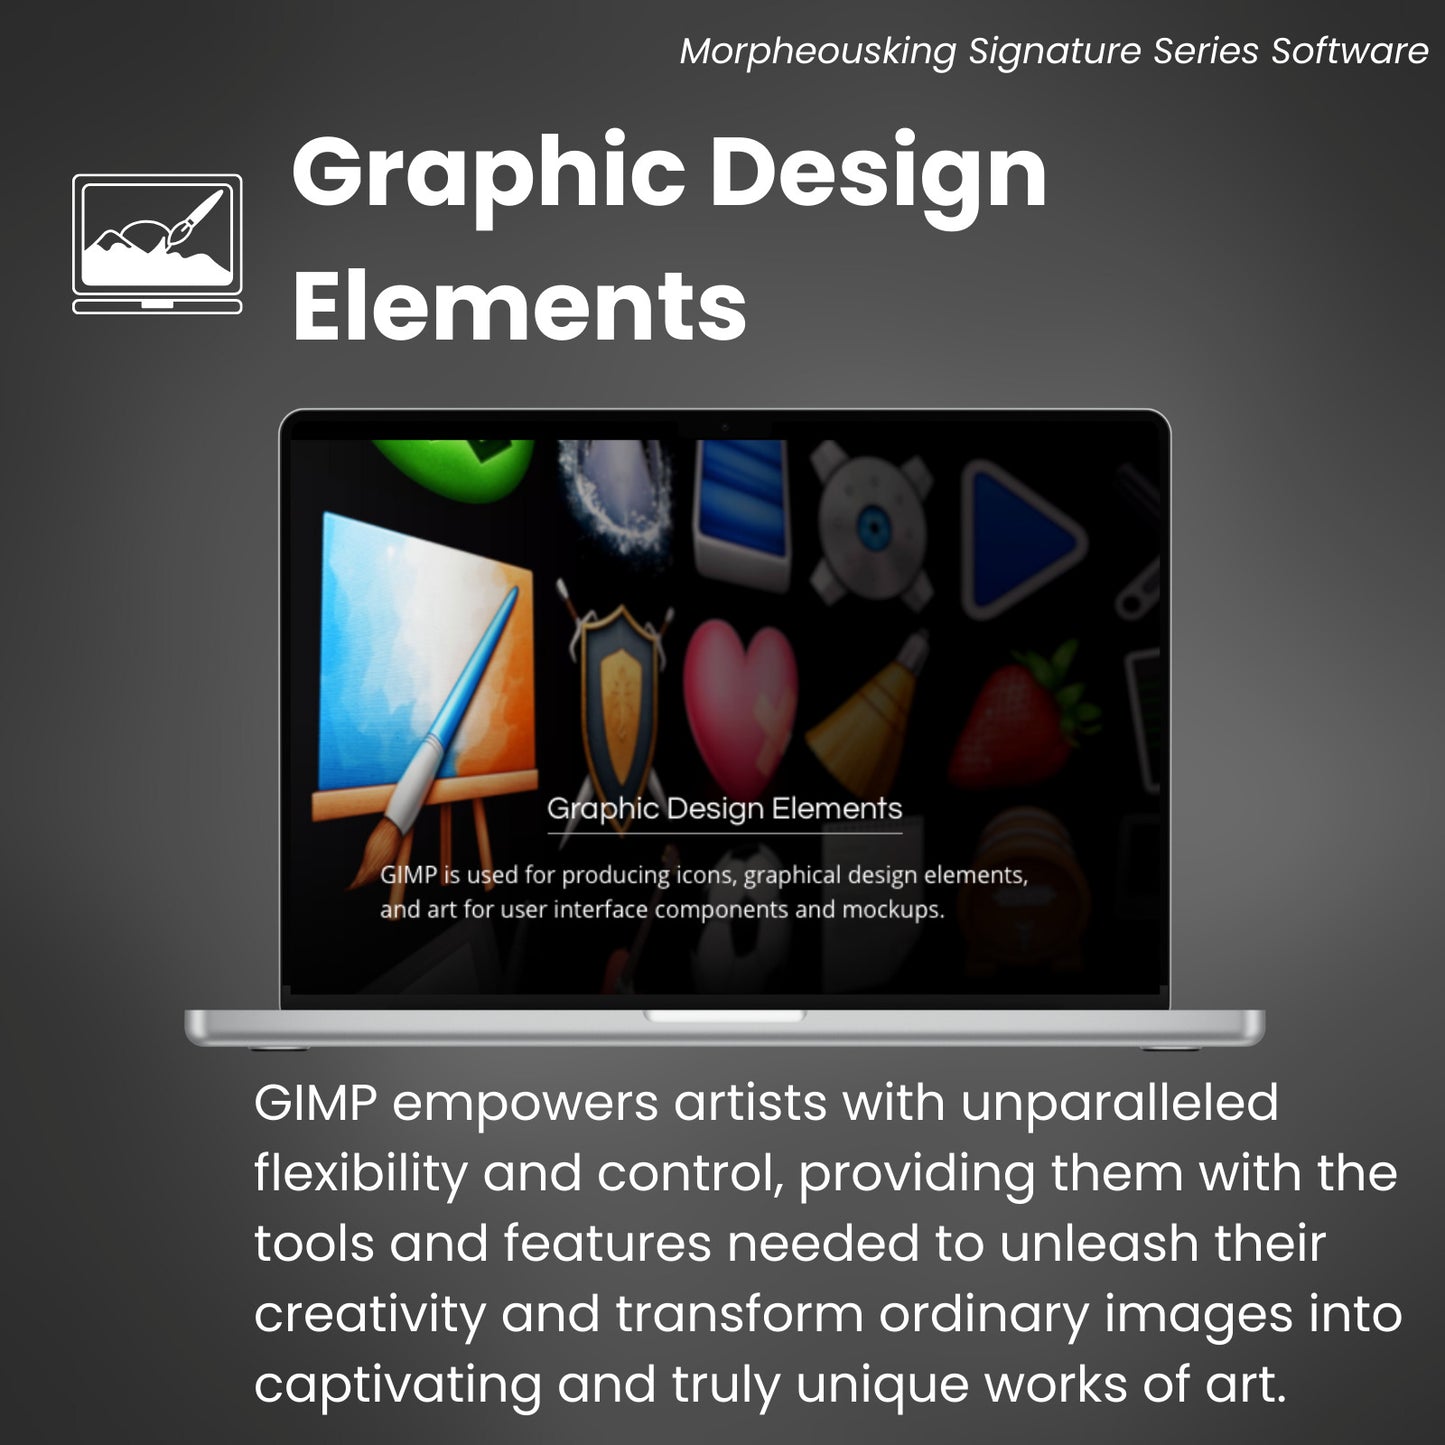 GIMP PRO 2023 Photo Editing Software Suite for Windows & MAC with Bonuses